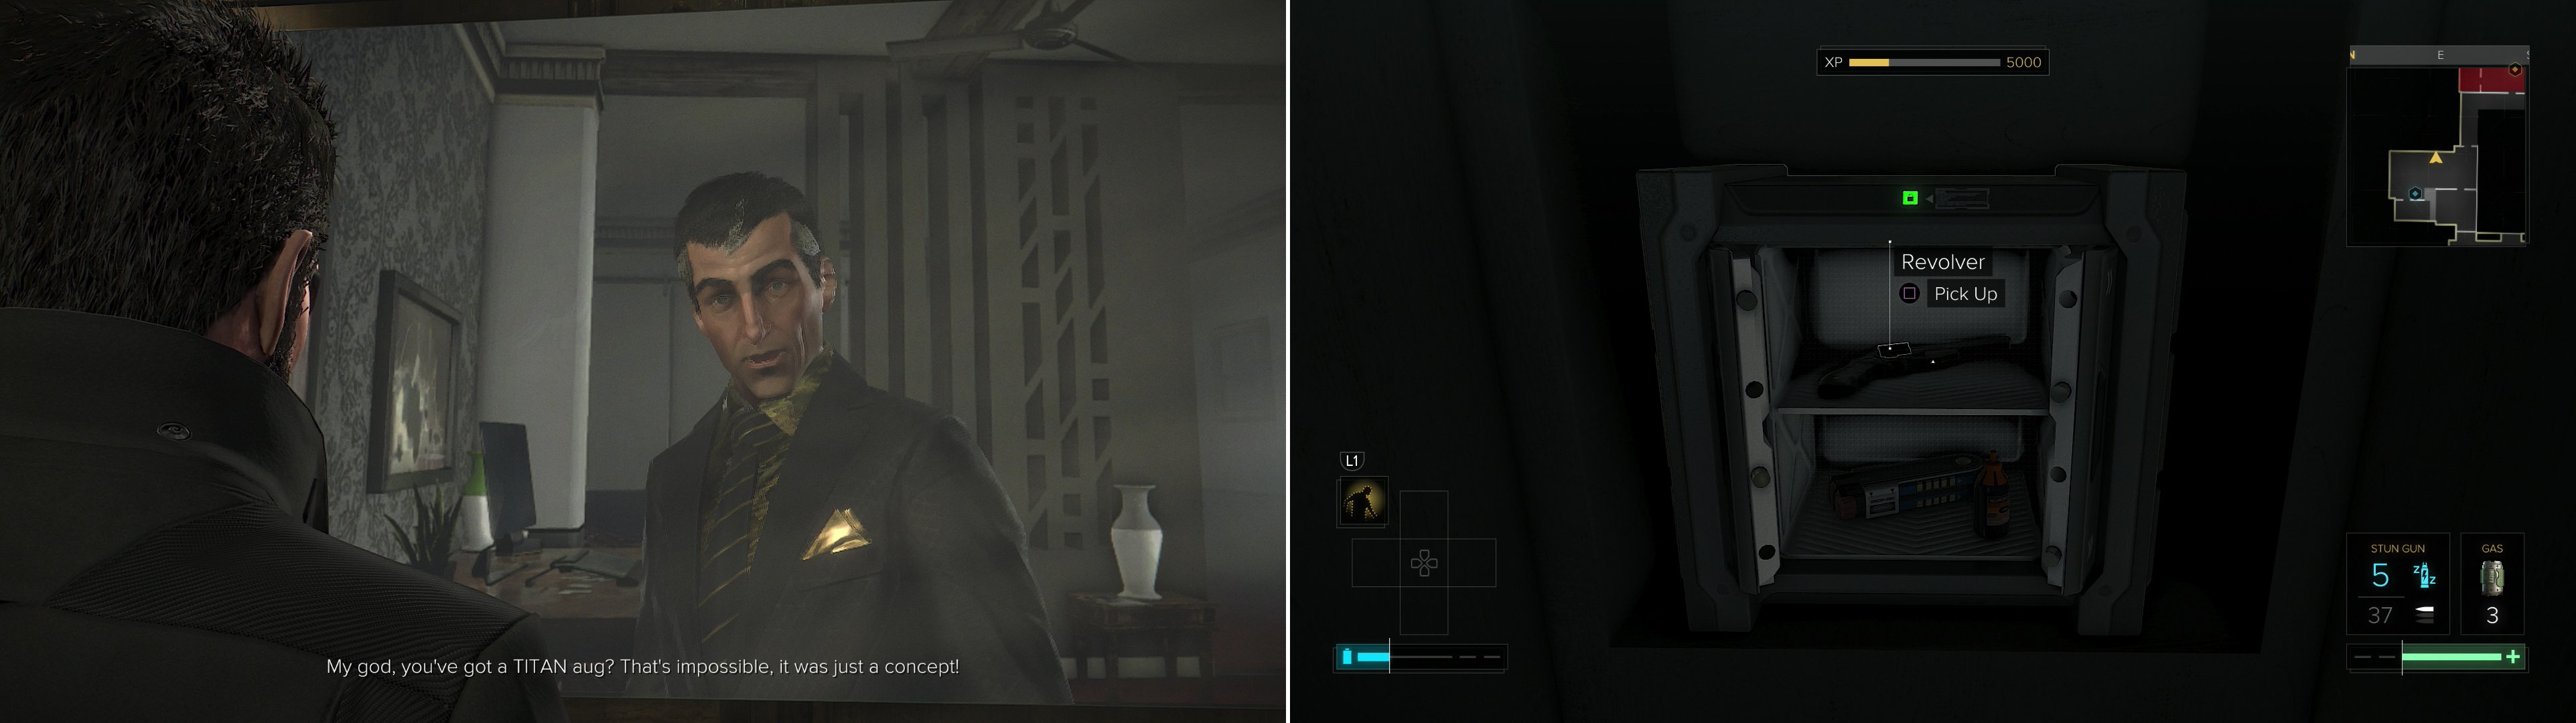 Confront Sarif and ask him about your mysterious augmentations (left) then go grab a bit of loot you couldn't grab the first time around (right).